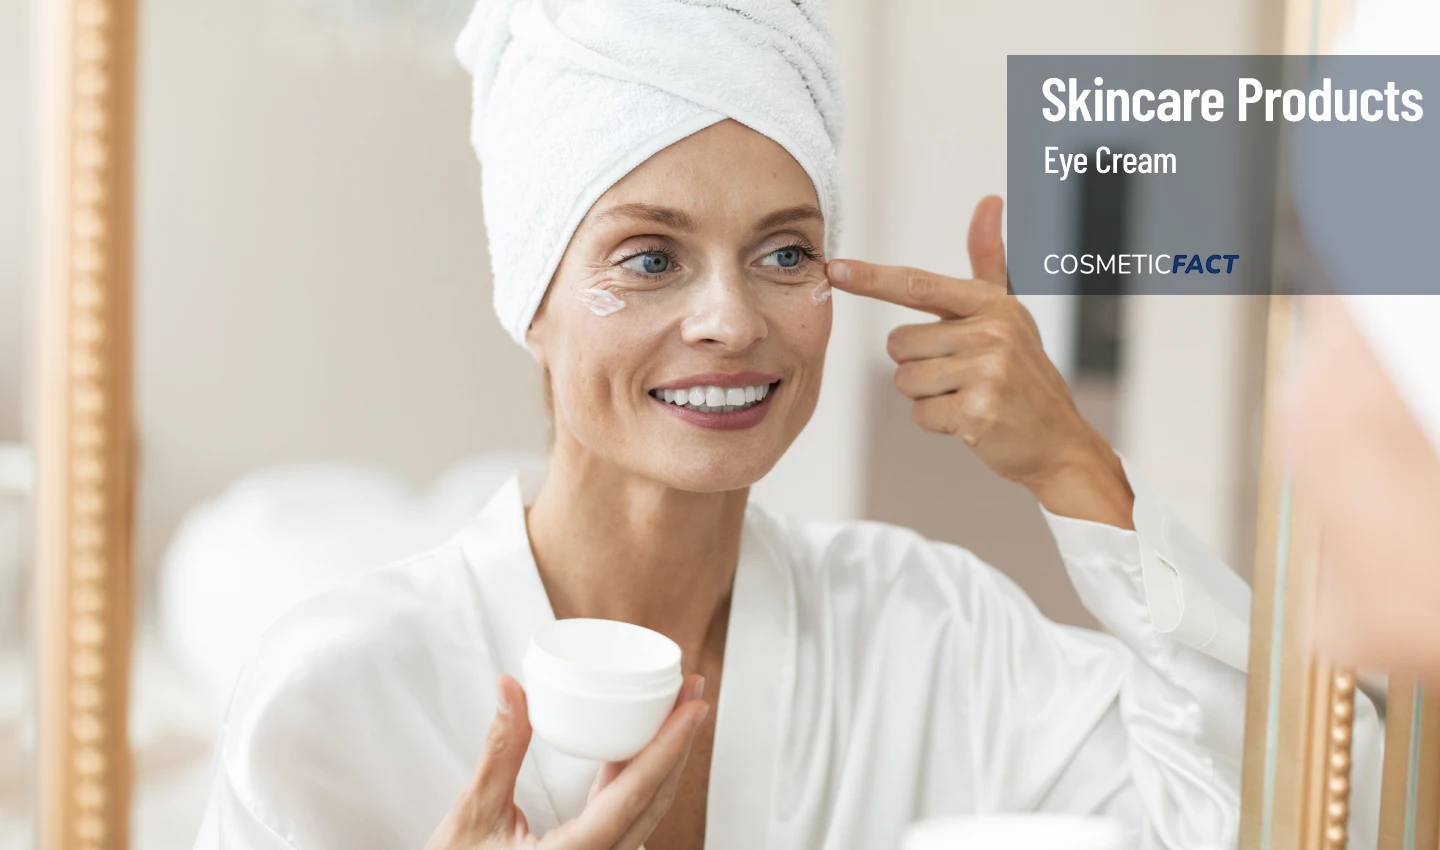 A mature woman smiles while applying eye cream to her under-eye area, enjoying the many benefits it provides for her skincare routine, including reducing fine lines, wrinkles, and dark circles.